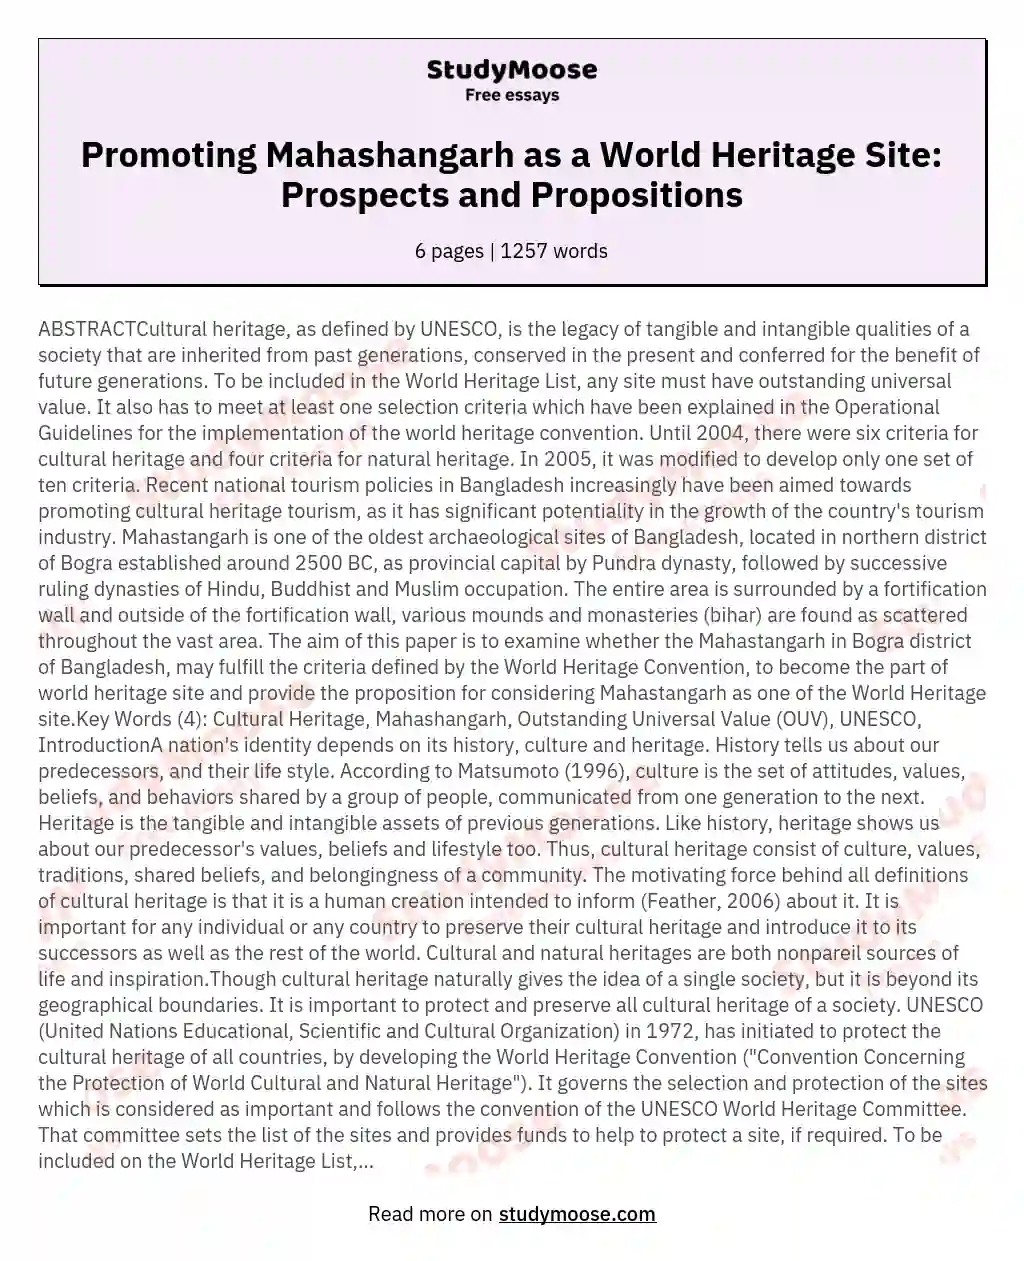 Promoting Mahashangarh as a World Heritage Site: Prospects and Propositions essay